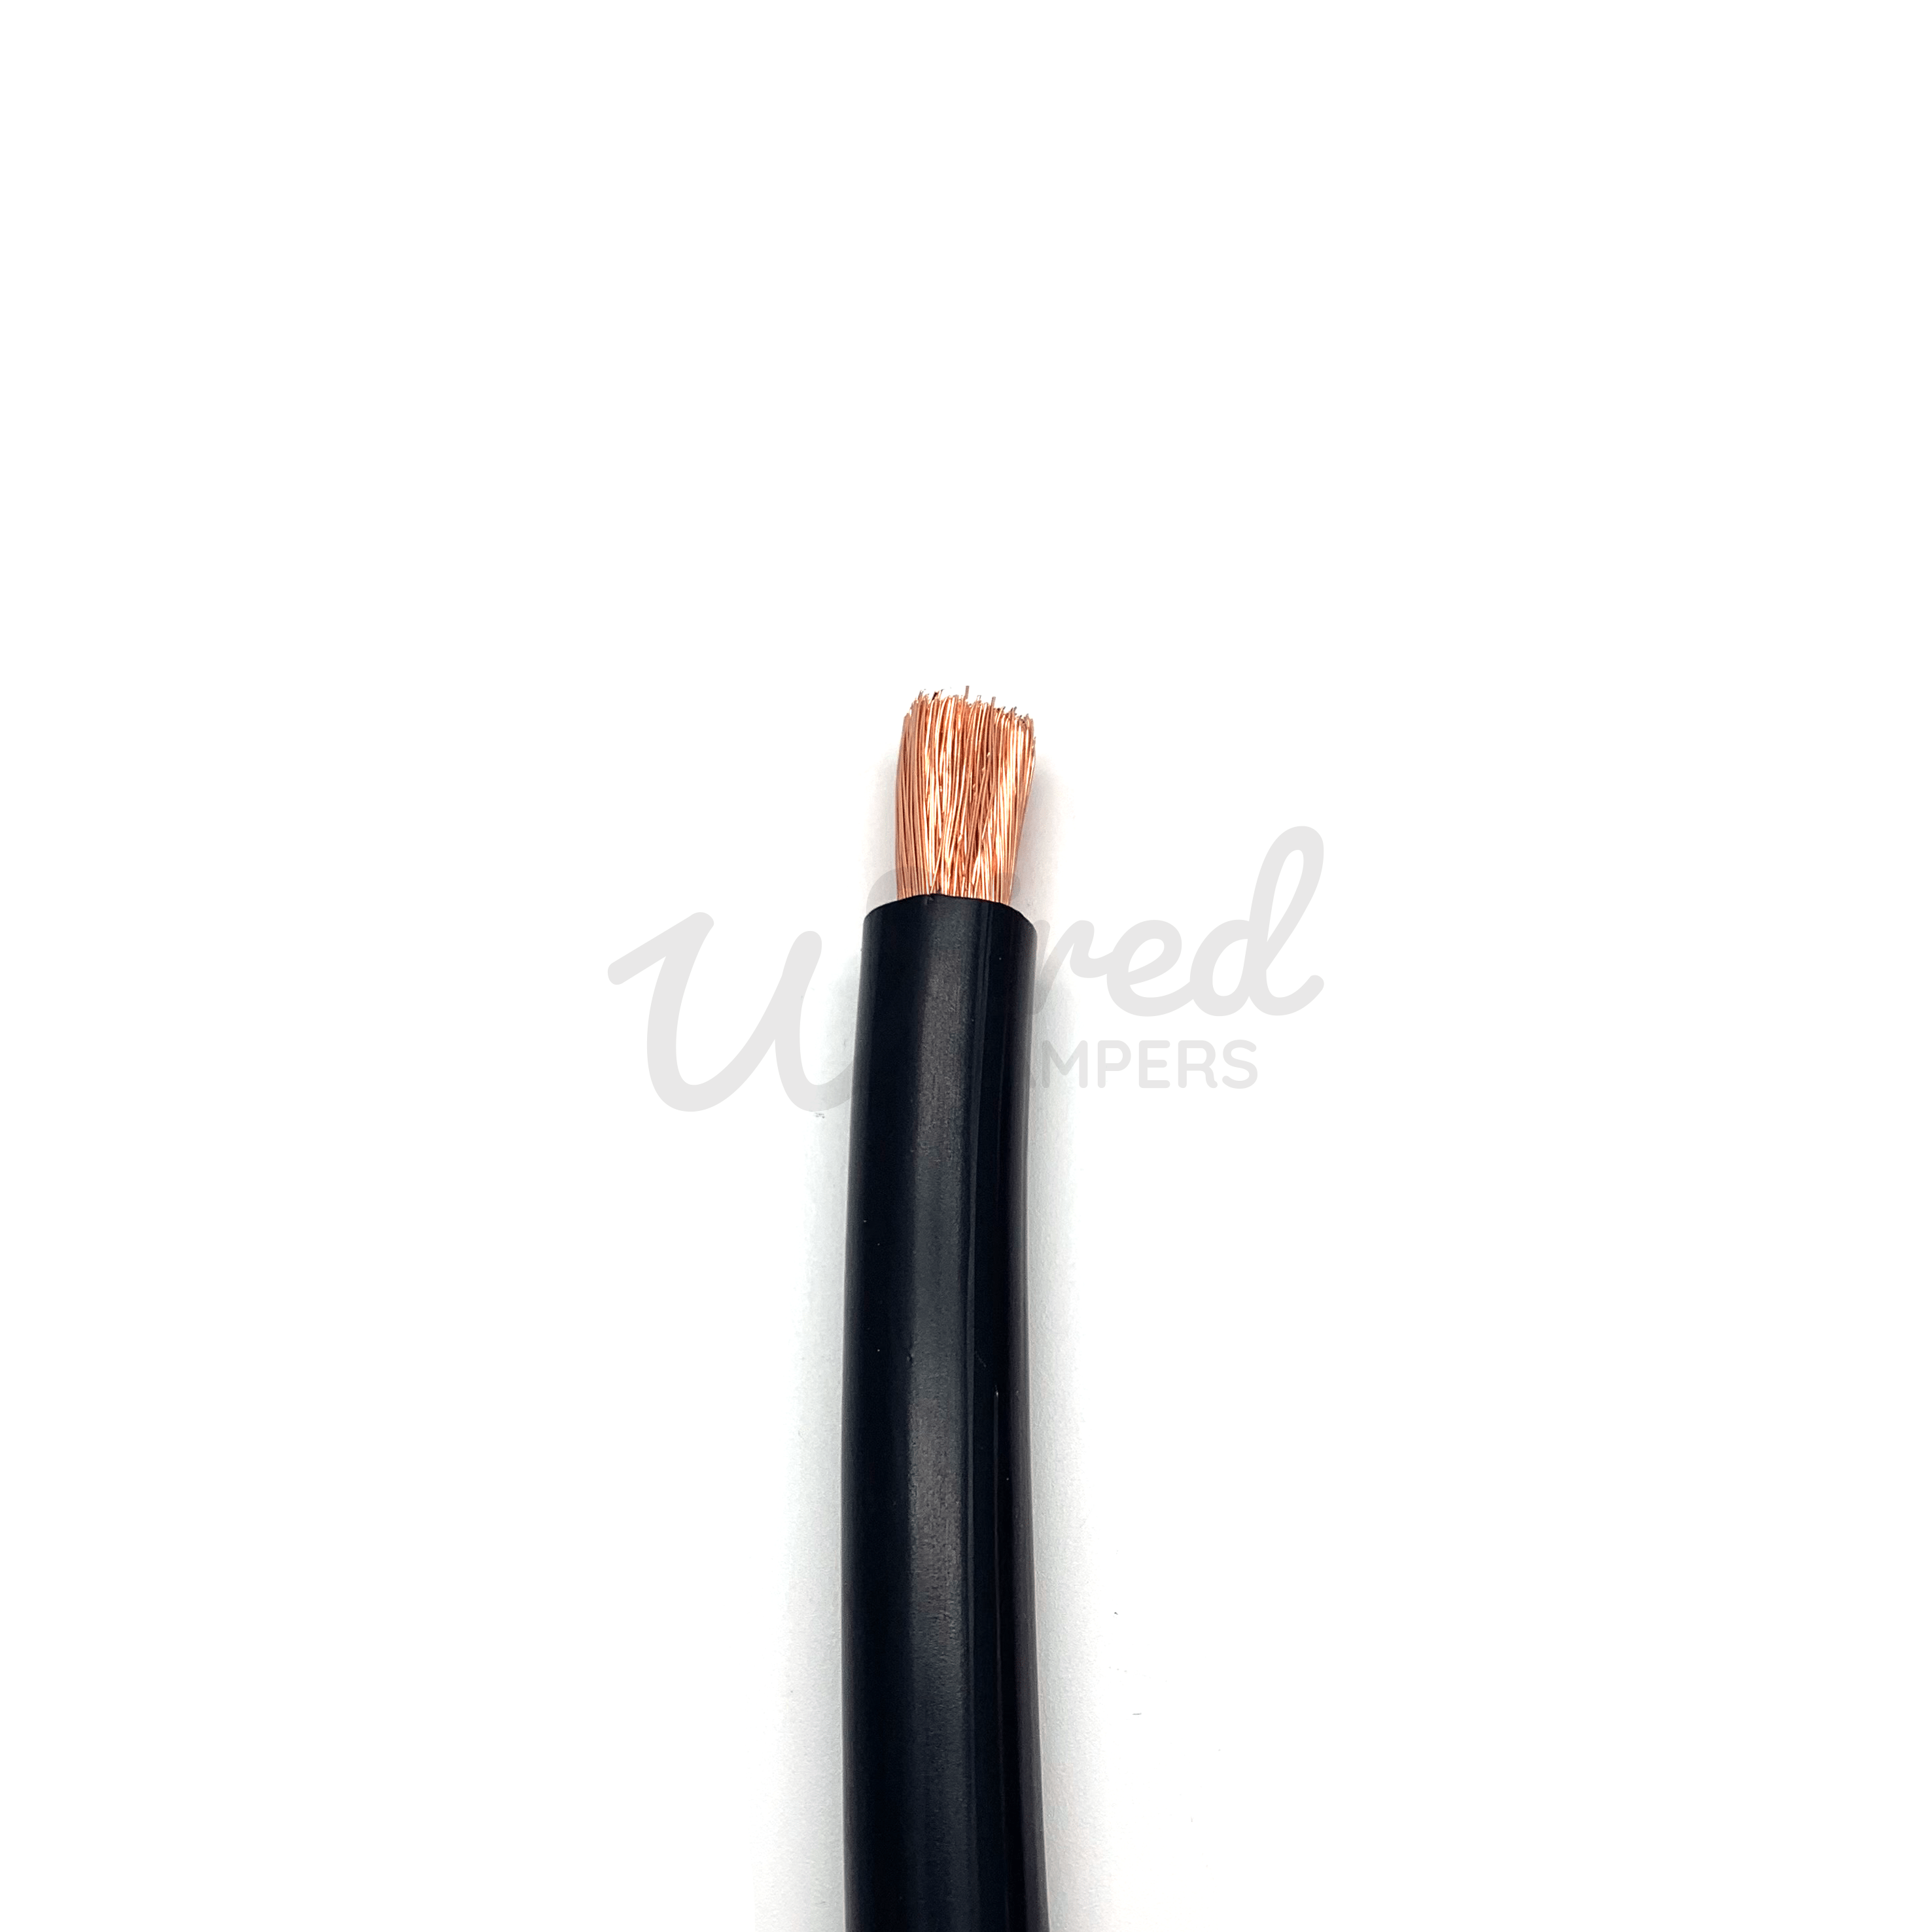 Wired Campers Limited 5M - 16mm2 110A Hi-Flex Battery/Welding/Inverter Flexible Cable - Black Negative